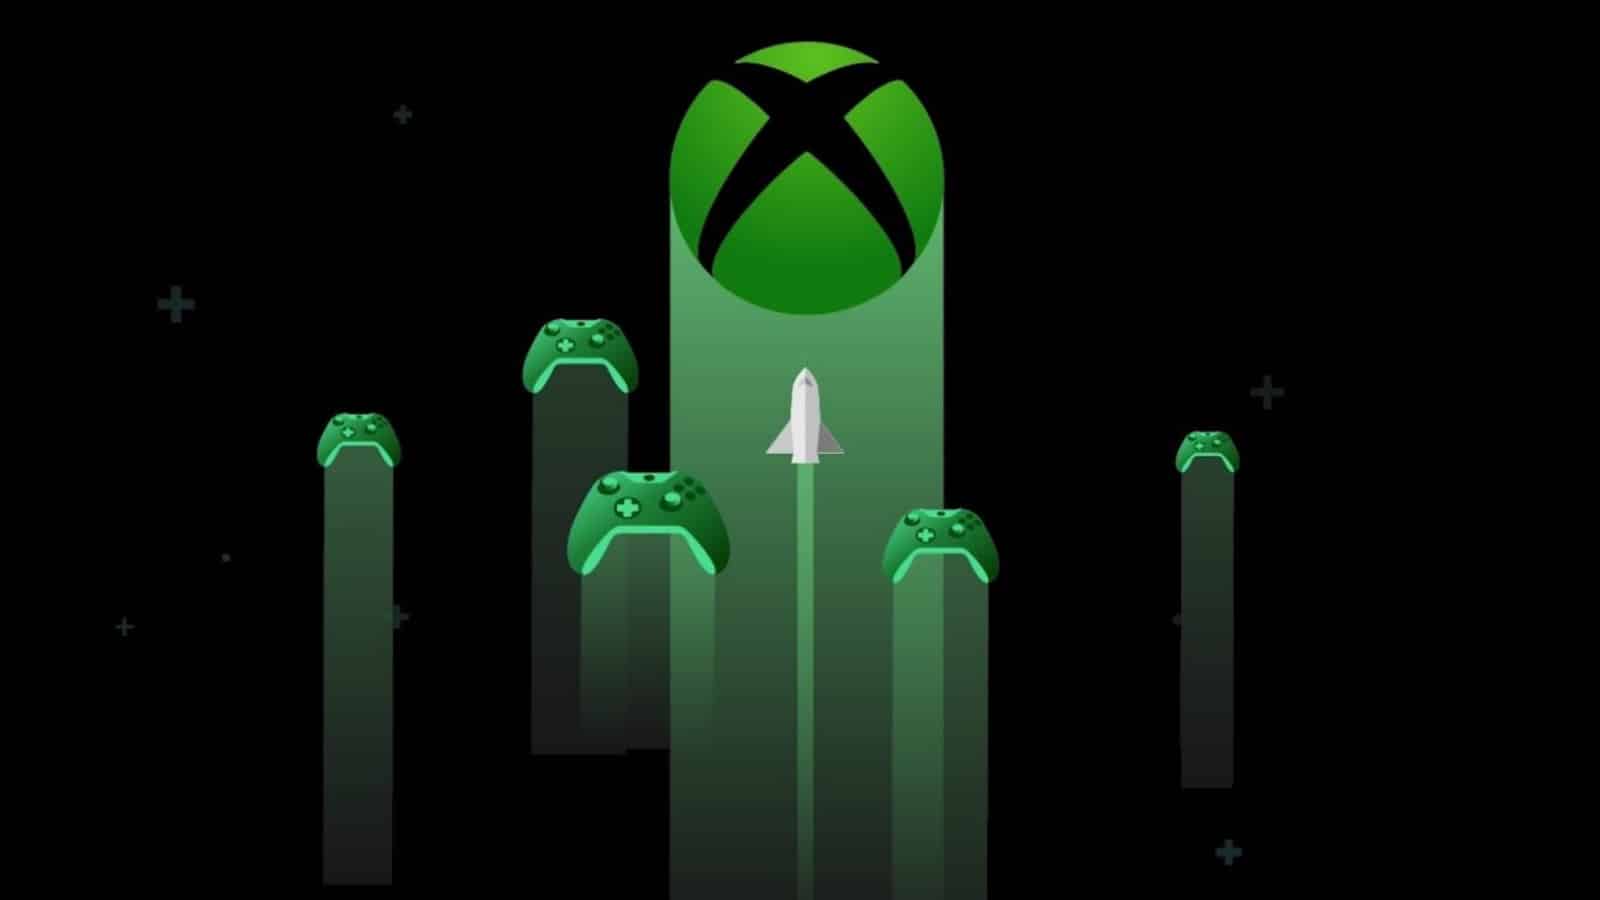 XBOX CLOUD GAMING NEWS and GAME PASS ARRIVING THIS MONTH (JUNE